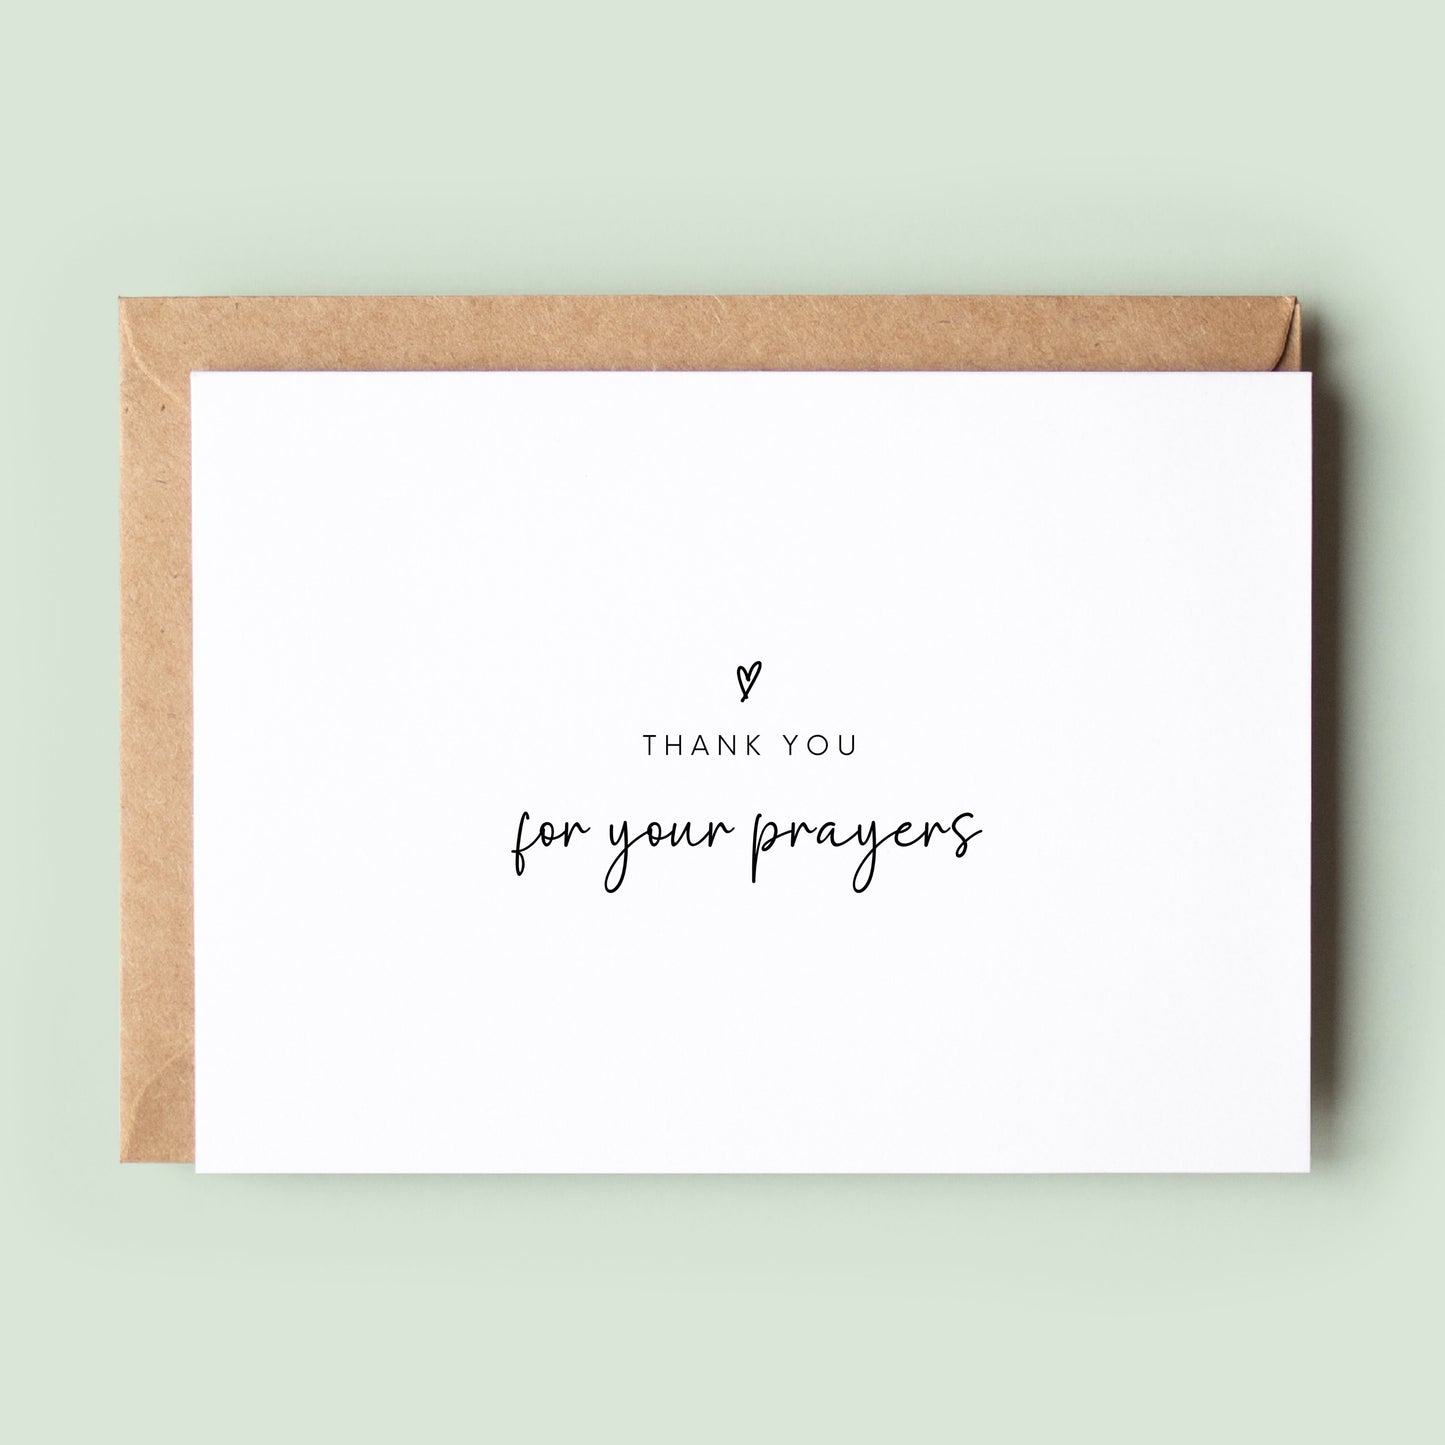 Thank You For Your Prayers, Sympathy Card, Condolence Card, Bereavement Card, Thinking of You, Funeral Thank You Card - #281